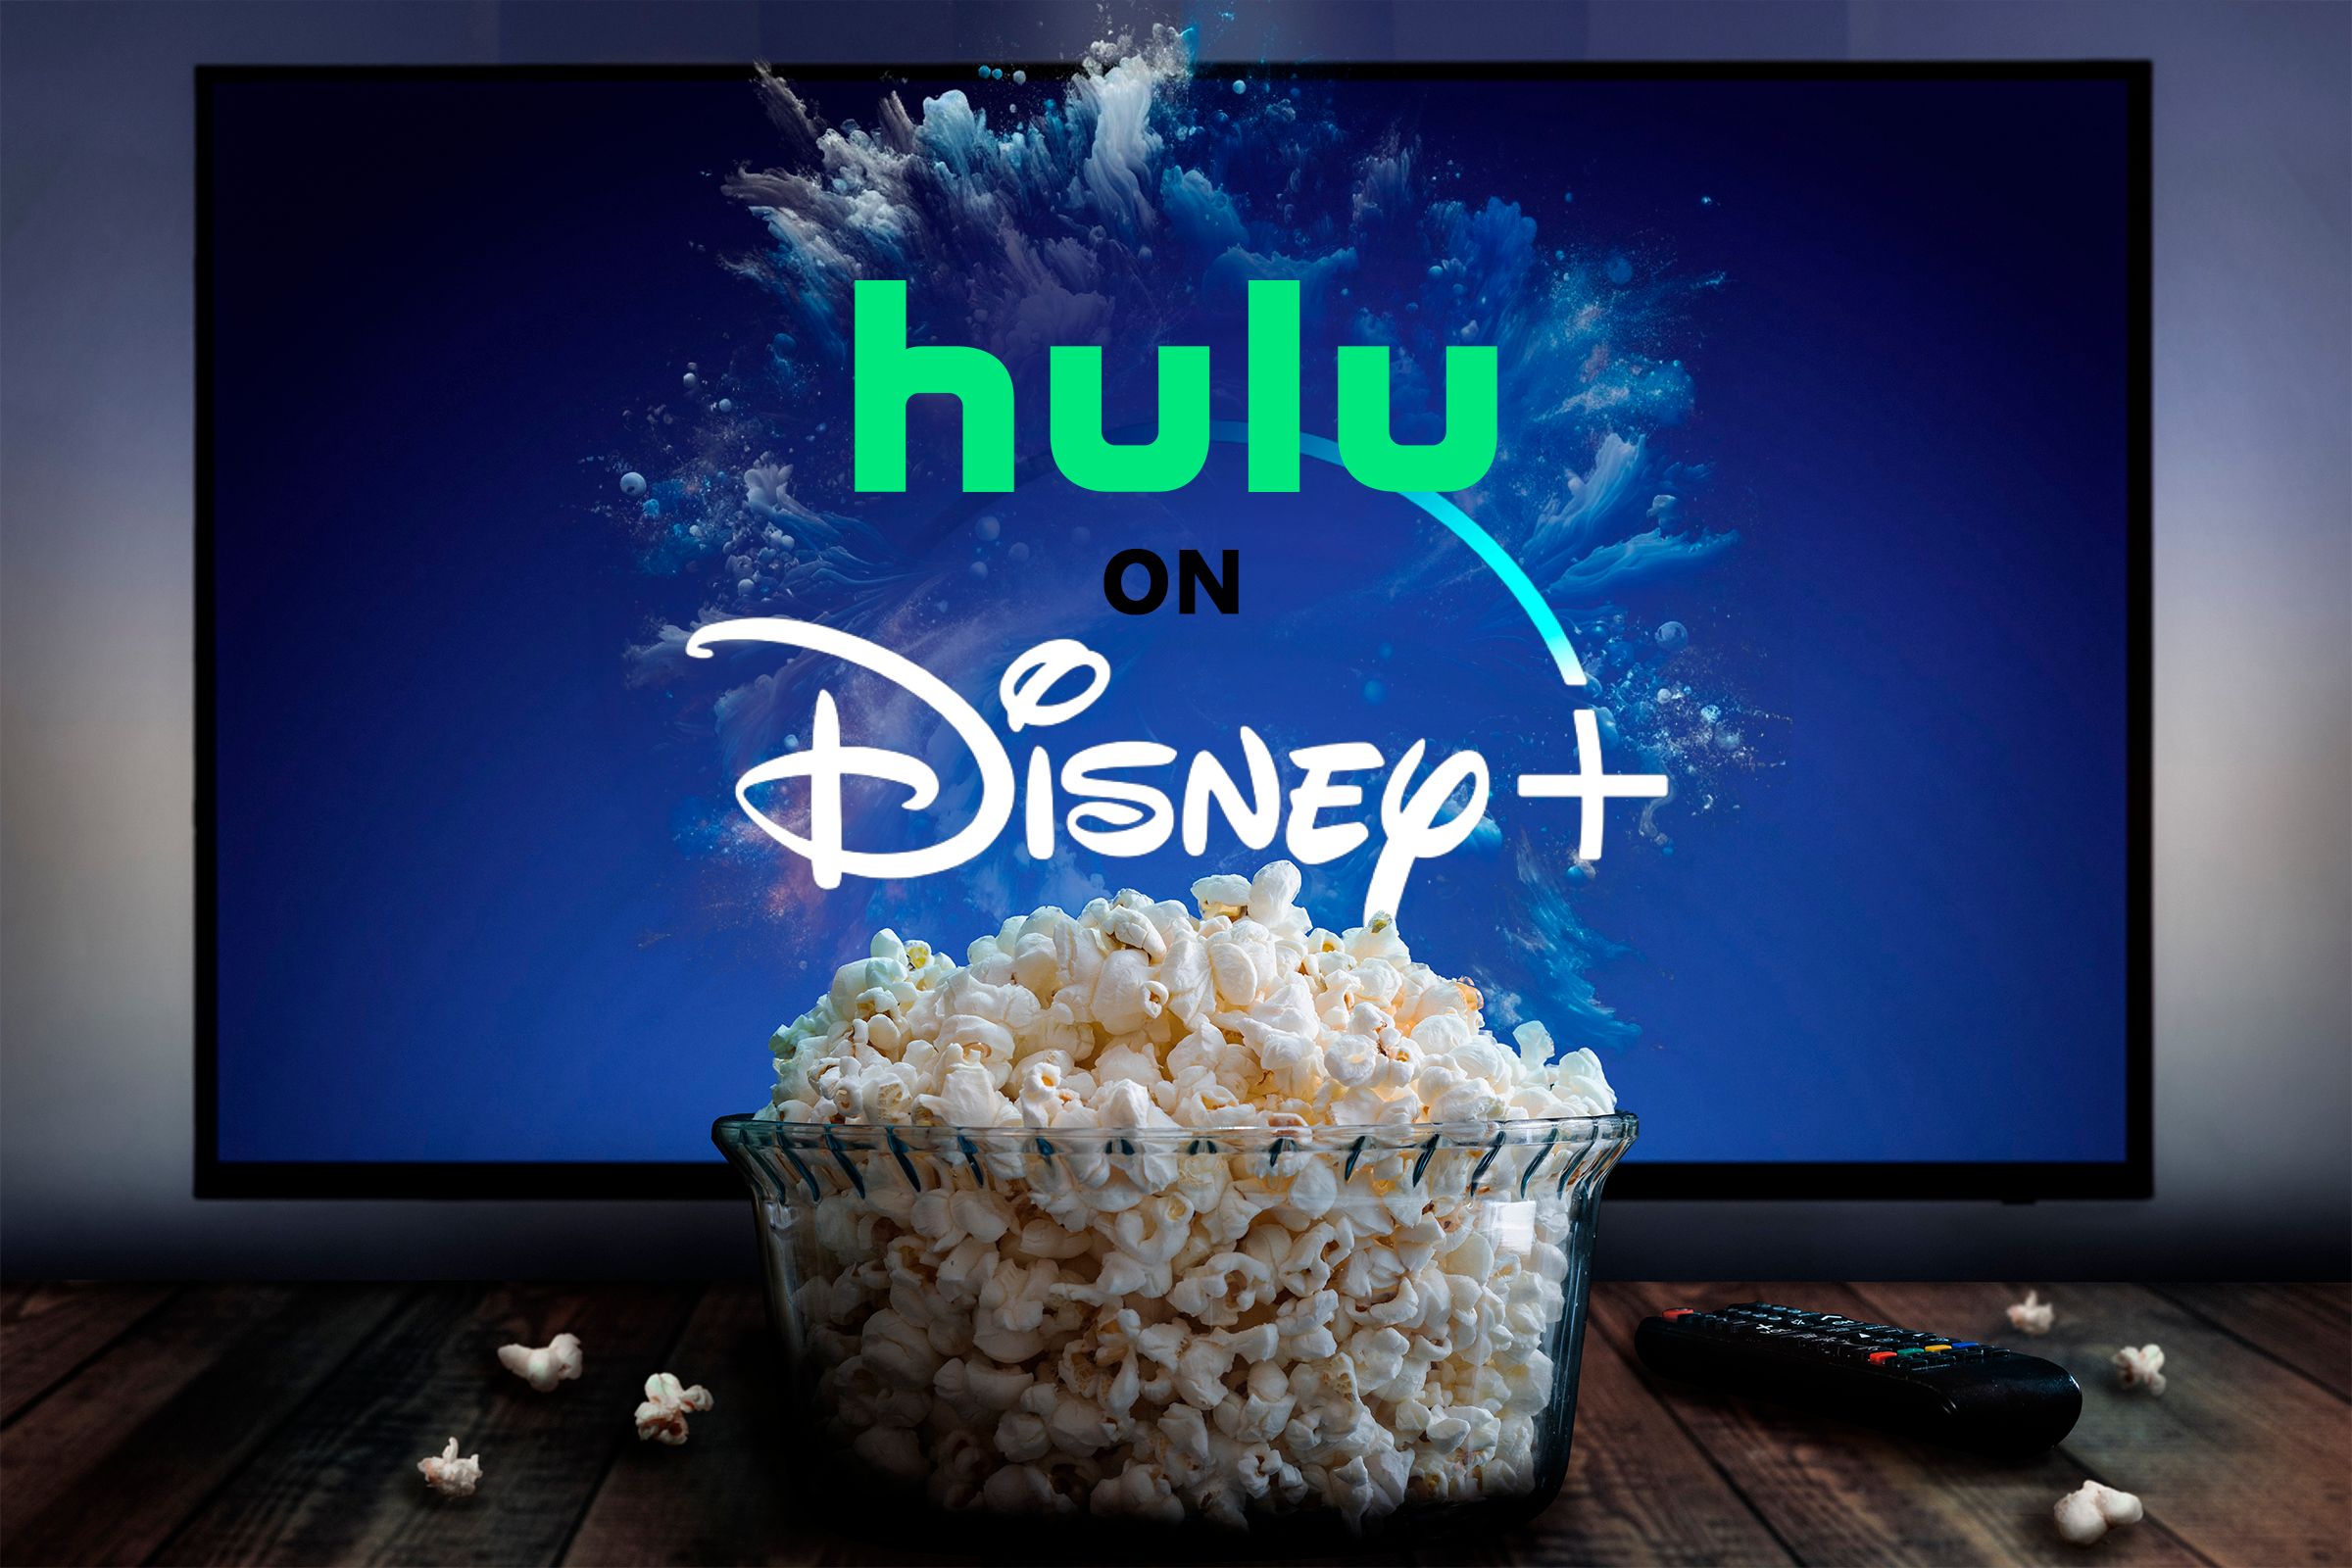 TV with Hulu and Disney Plus logos, and a bowl of popcorn in front.